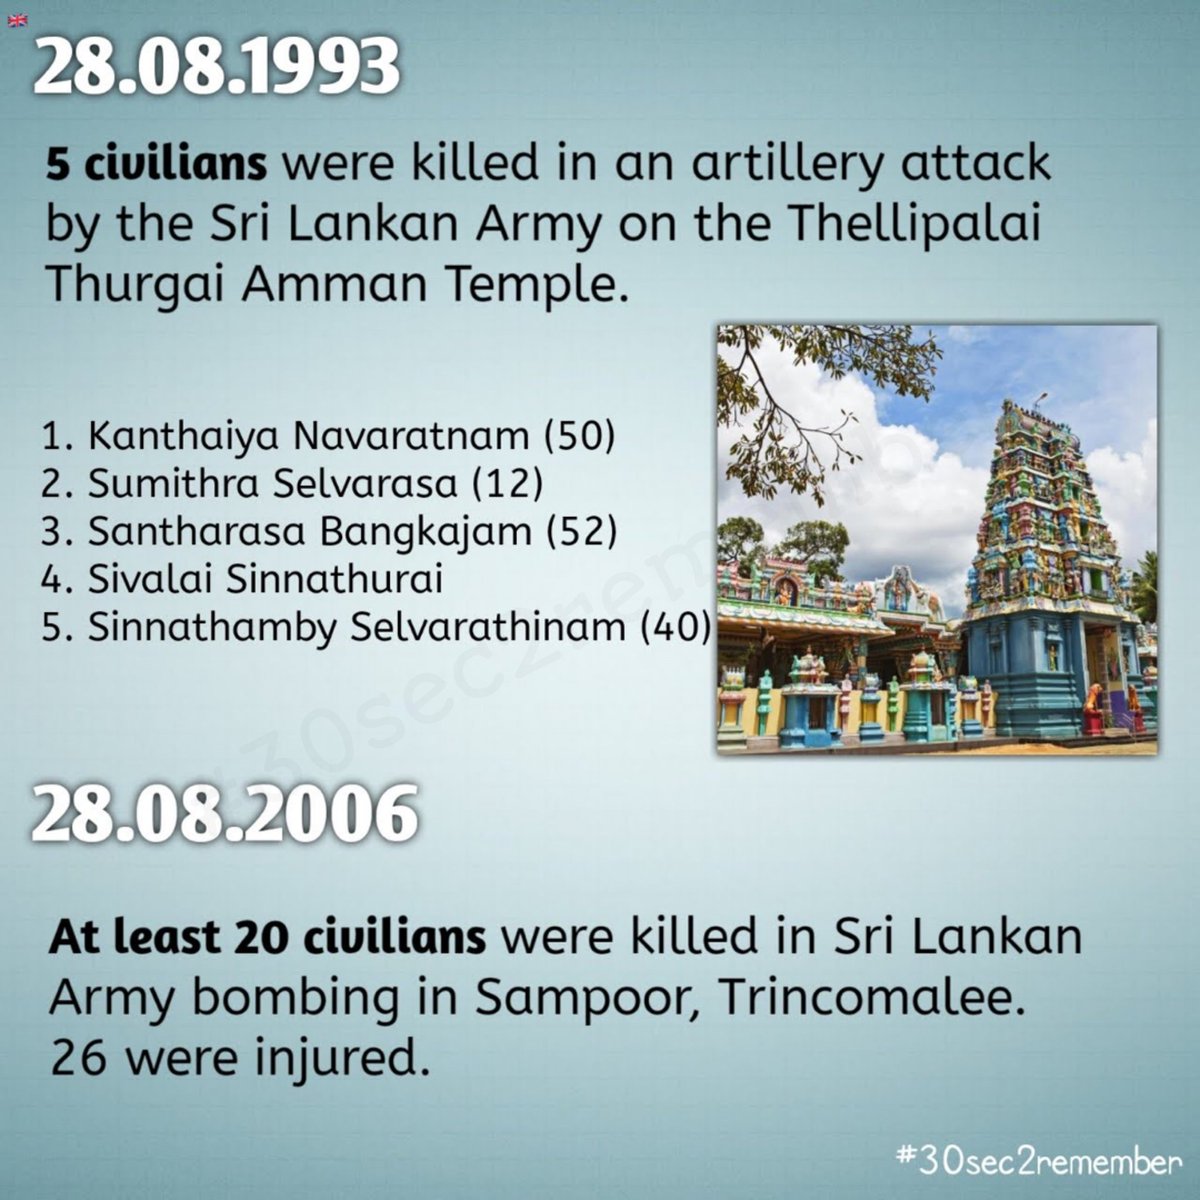 28.08.1993 5 #civilians were #killed in an #artilleryattack by the #SriLankan army on the #Thellipalai Thurgai #Ammantemple #30sec2remember #EelamTamilGenocide #Genocide